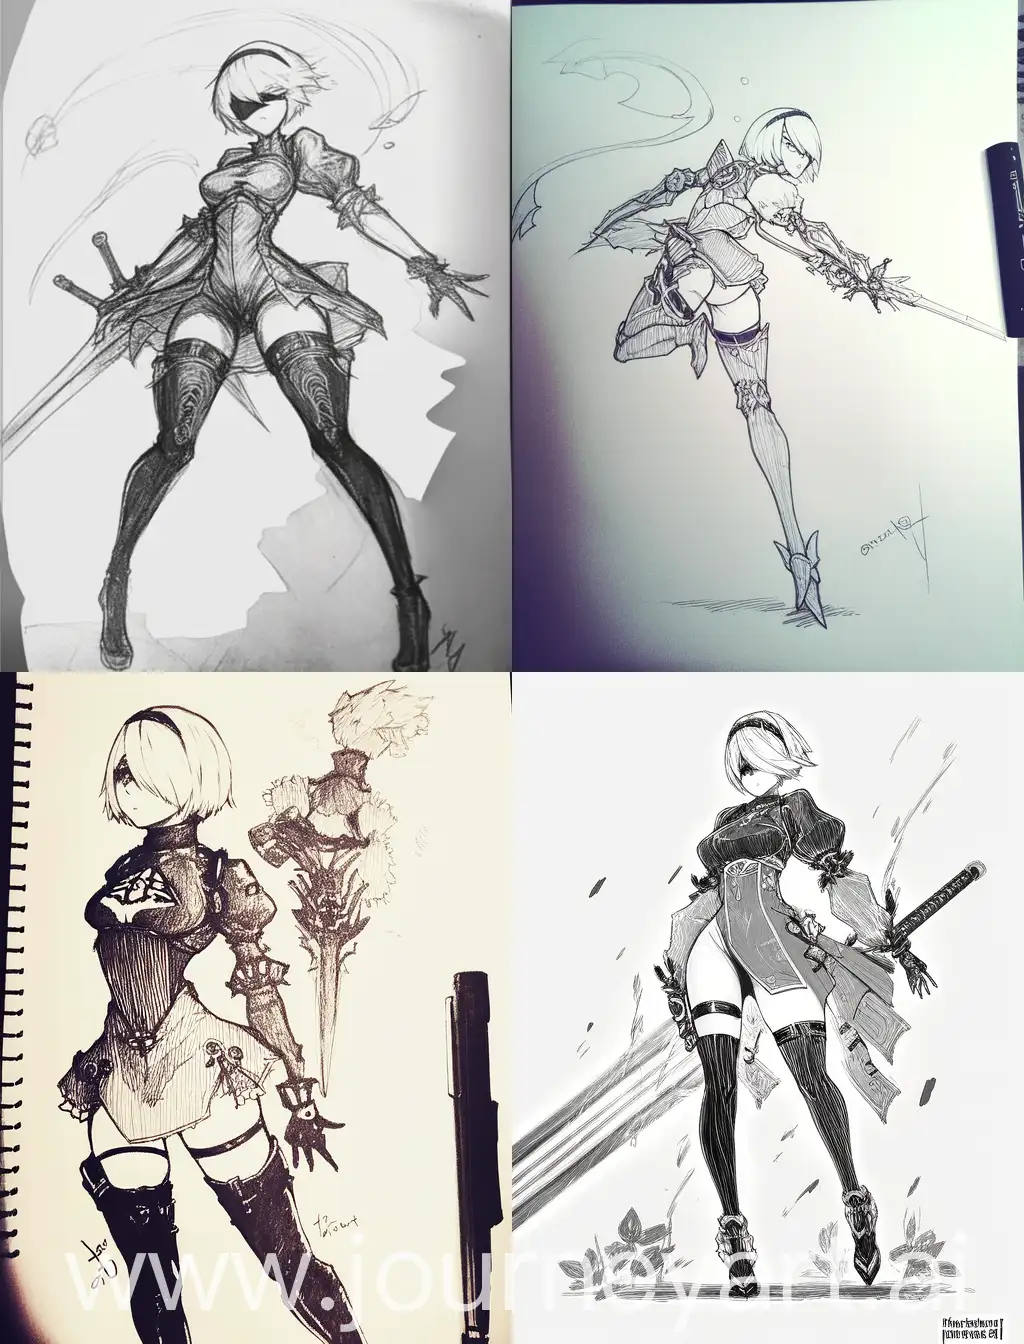 A full body pinterest art sketch of 2B from nier automata